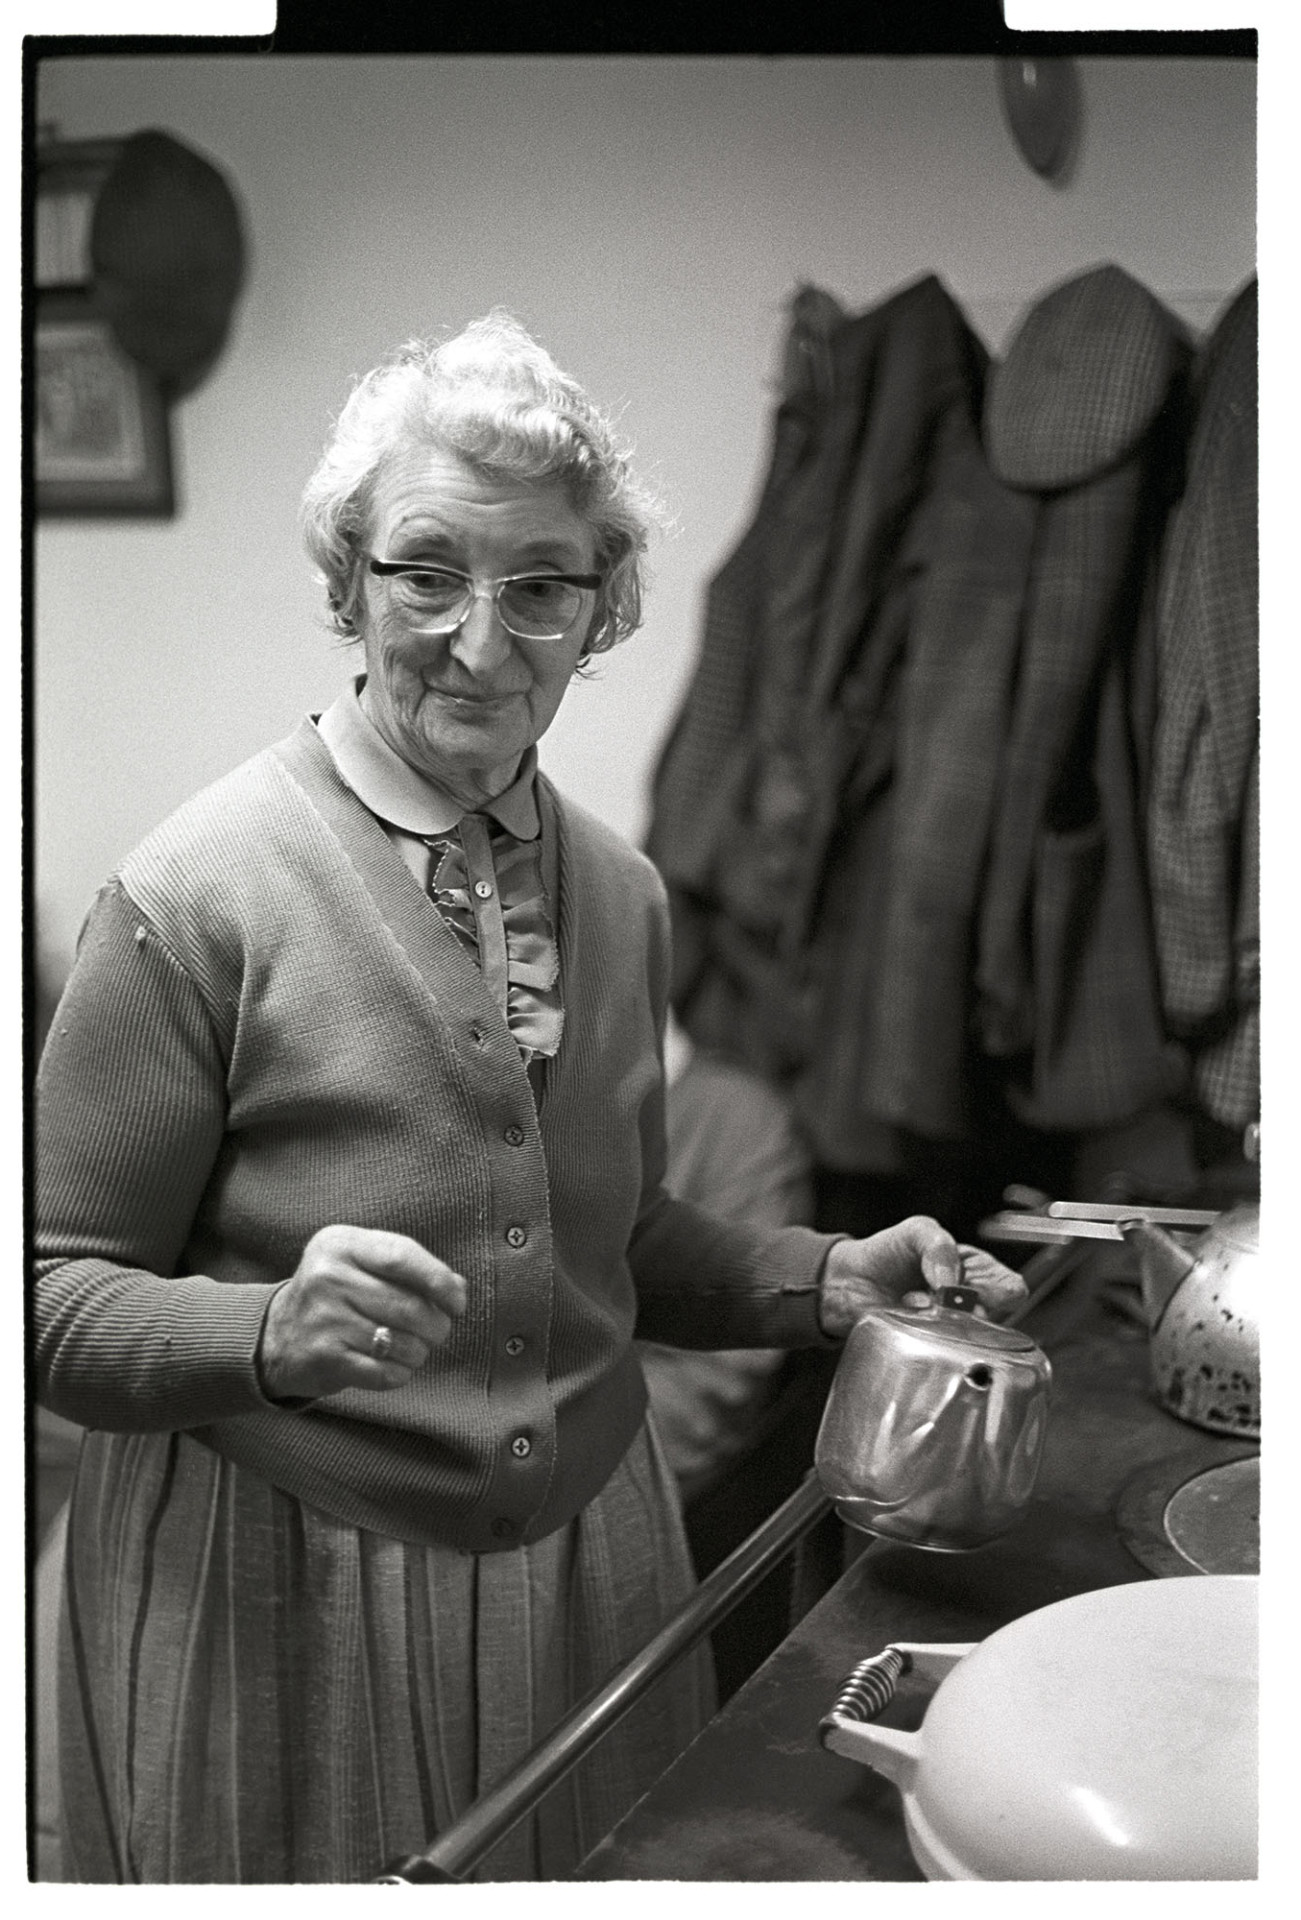 Woman standing in front of stove pouring tea. 
[A woman stood by a stove holding a teapot at an Exmoor farm. Coats and hats are hung up on a wall in the background.]